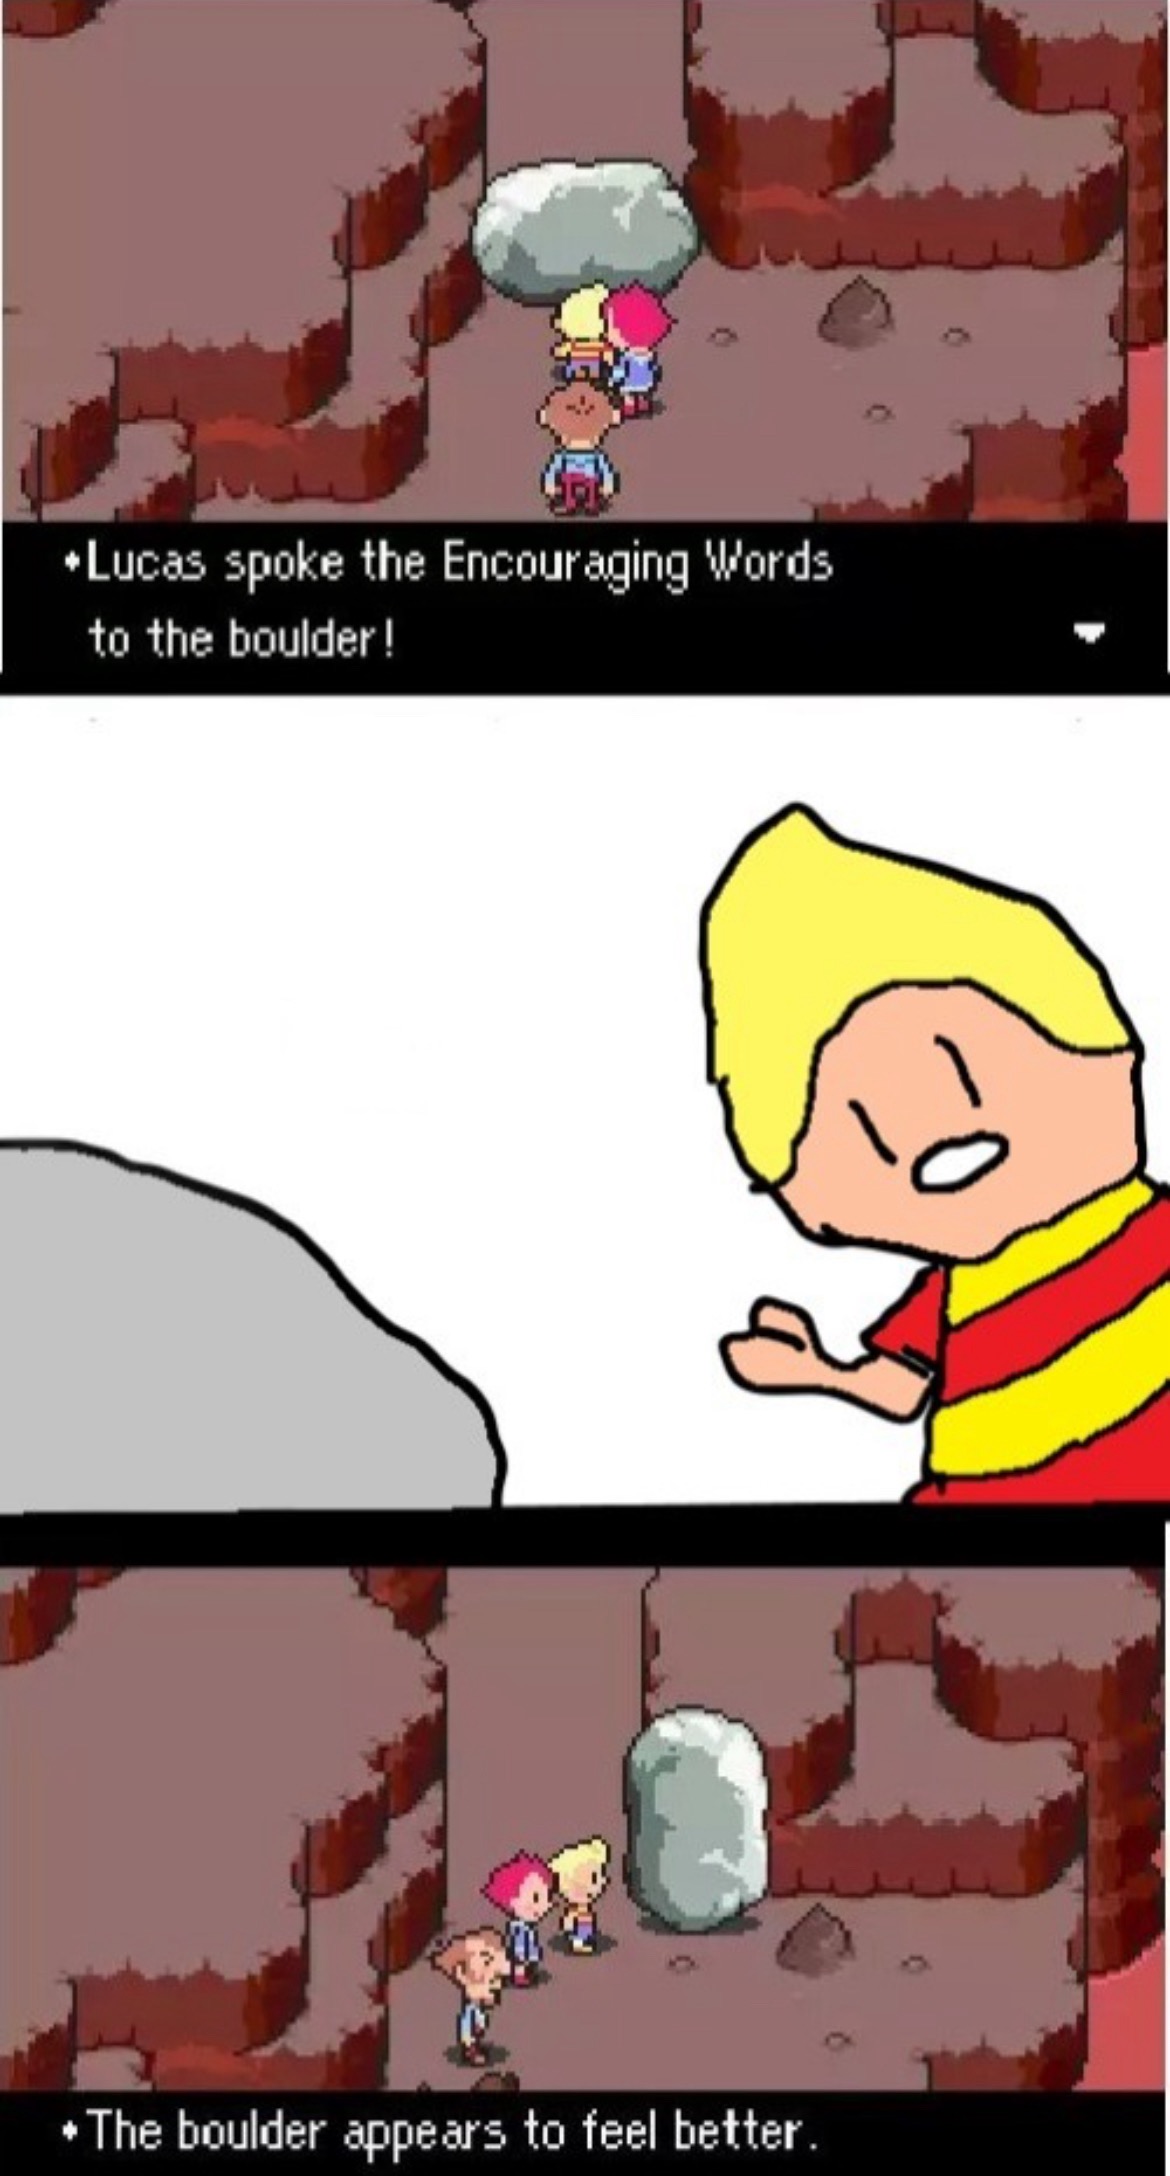 High Quality Lucas spoke the Encouraging Words to the boulder Blank Meme Template